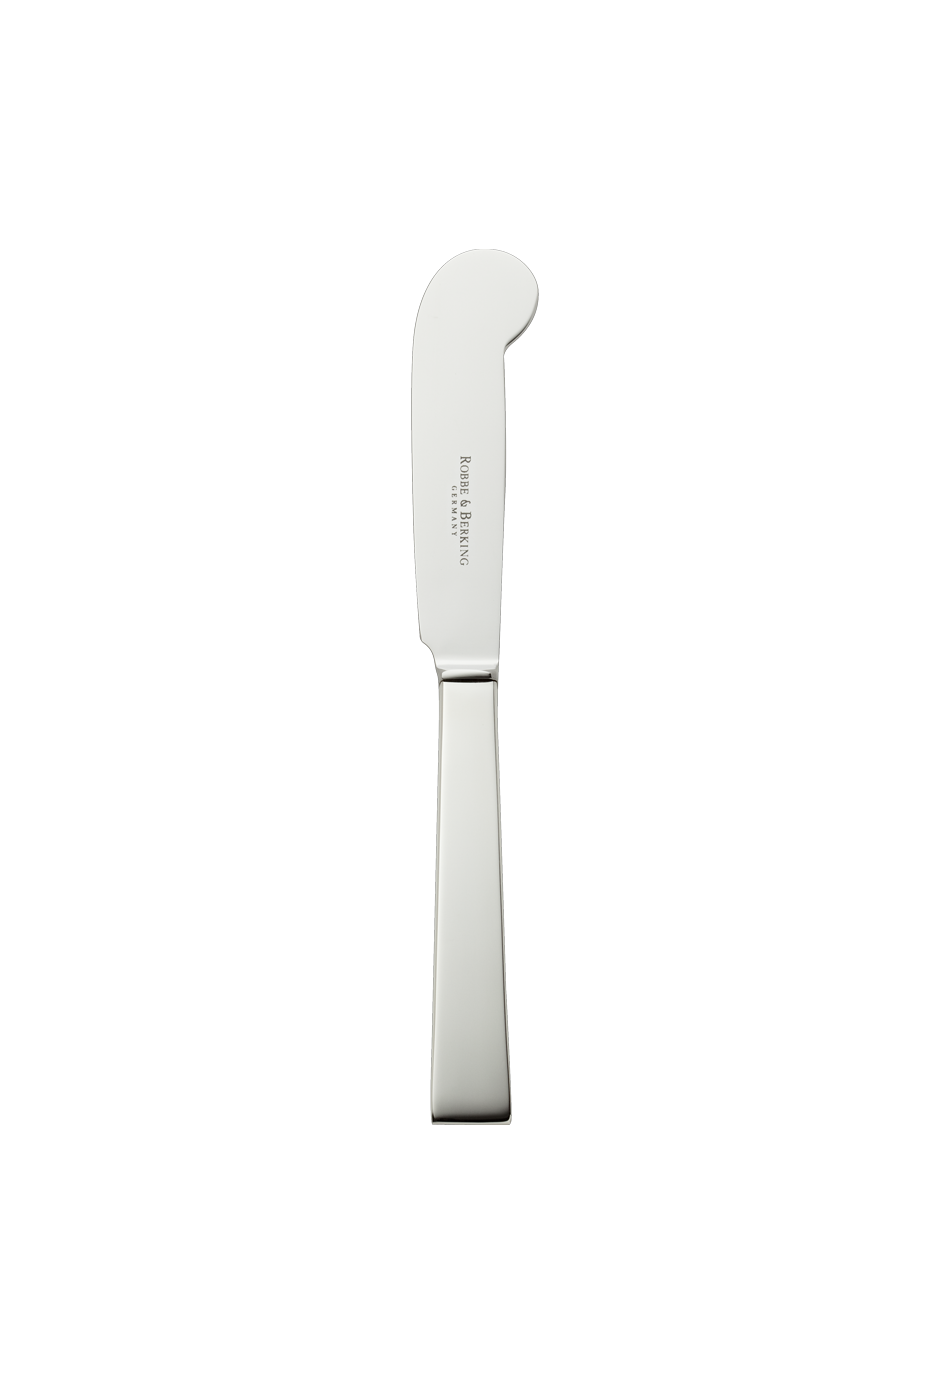 Sphinx Butter Knife (150g massive silverplated)